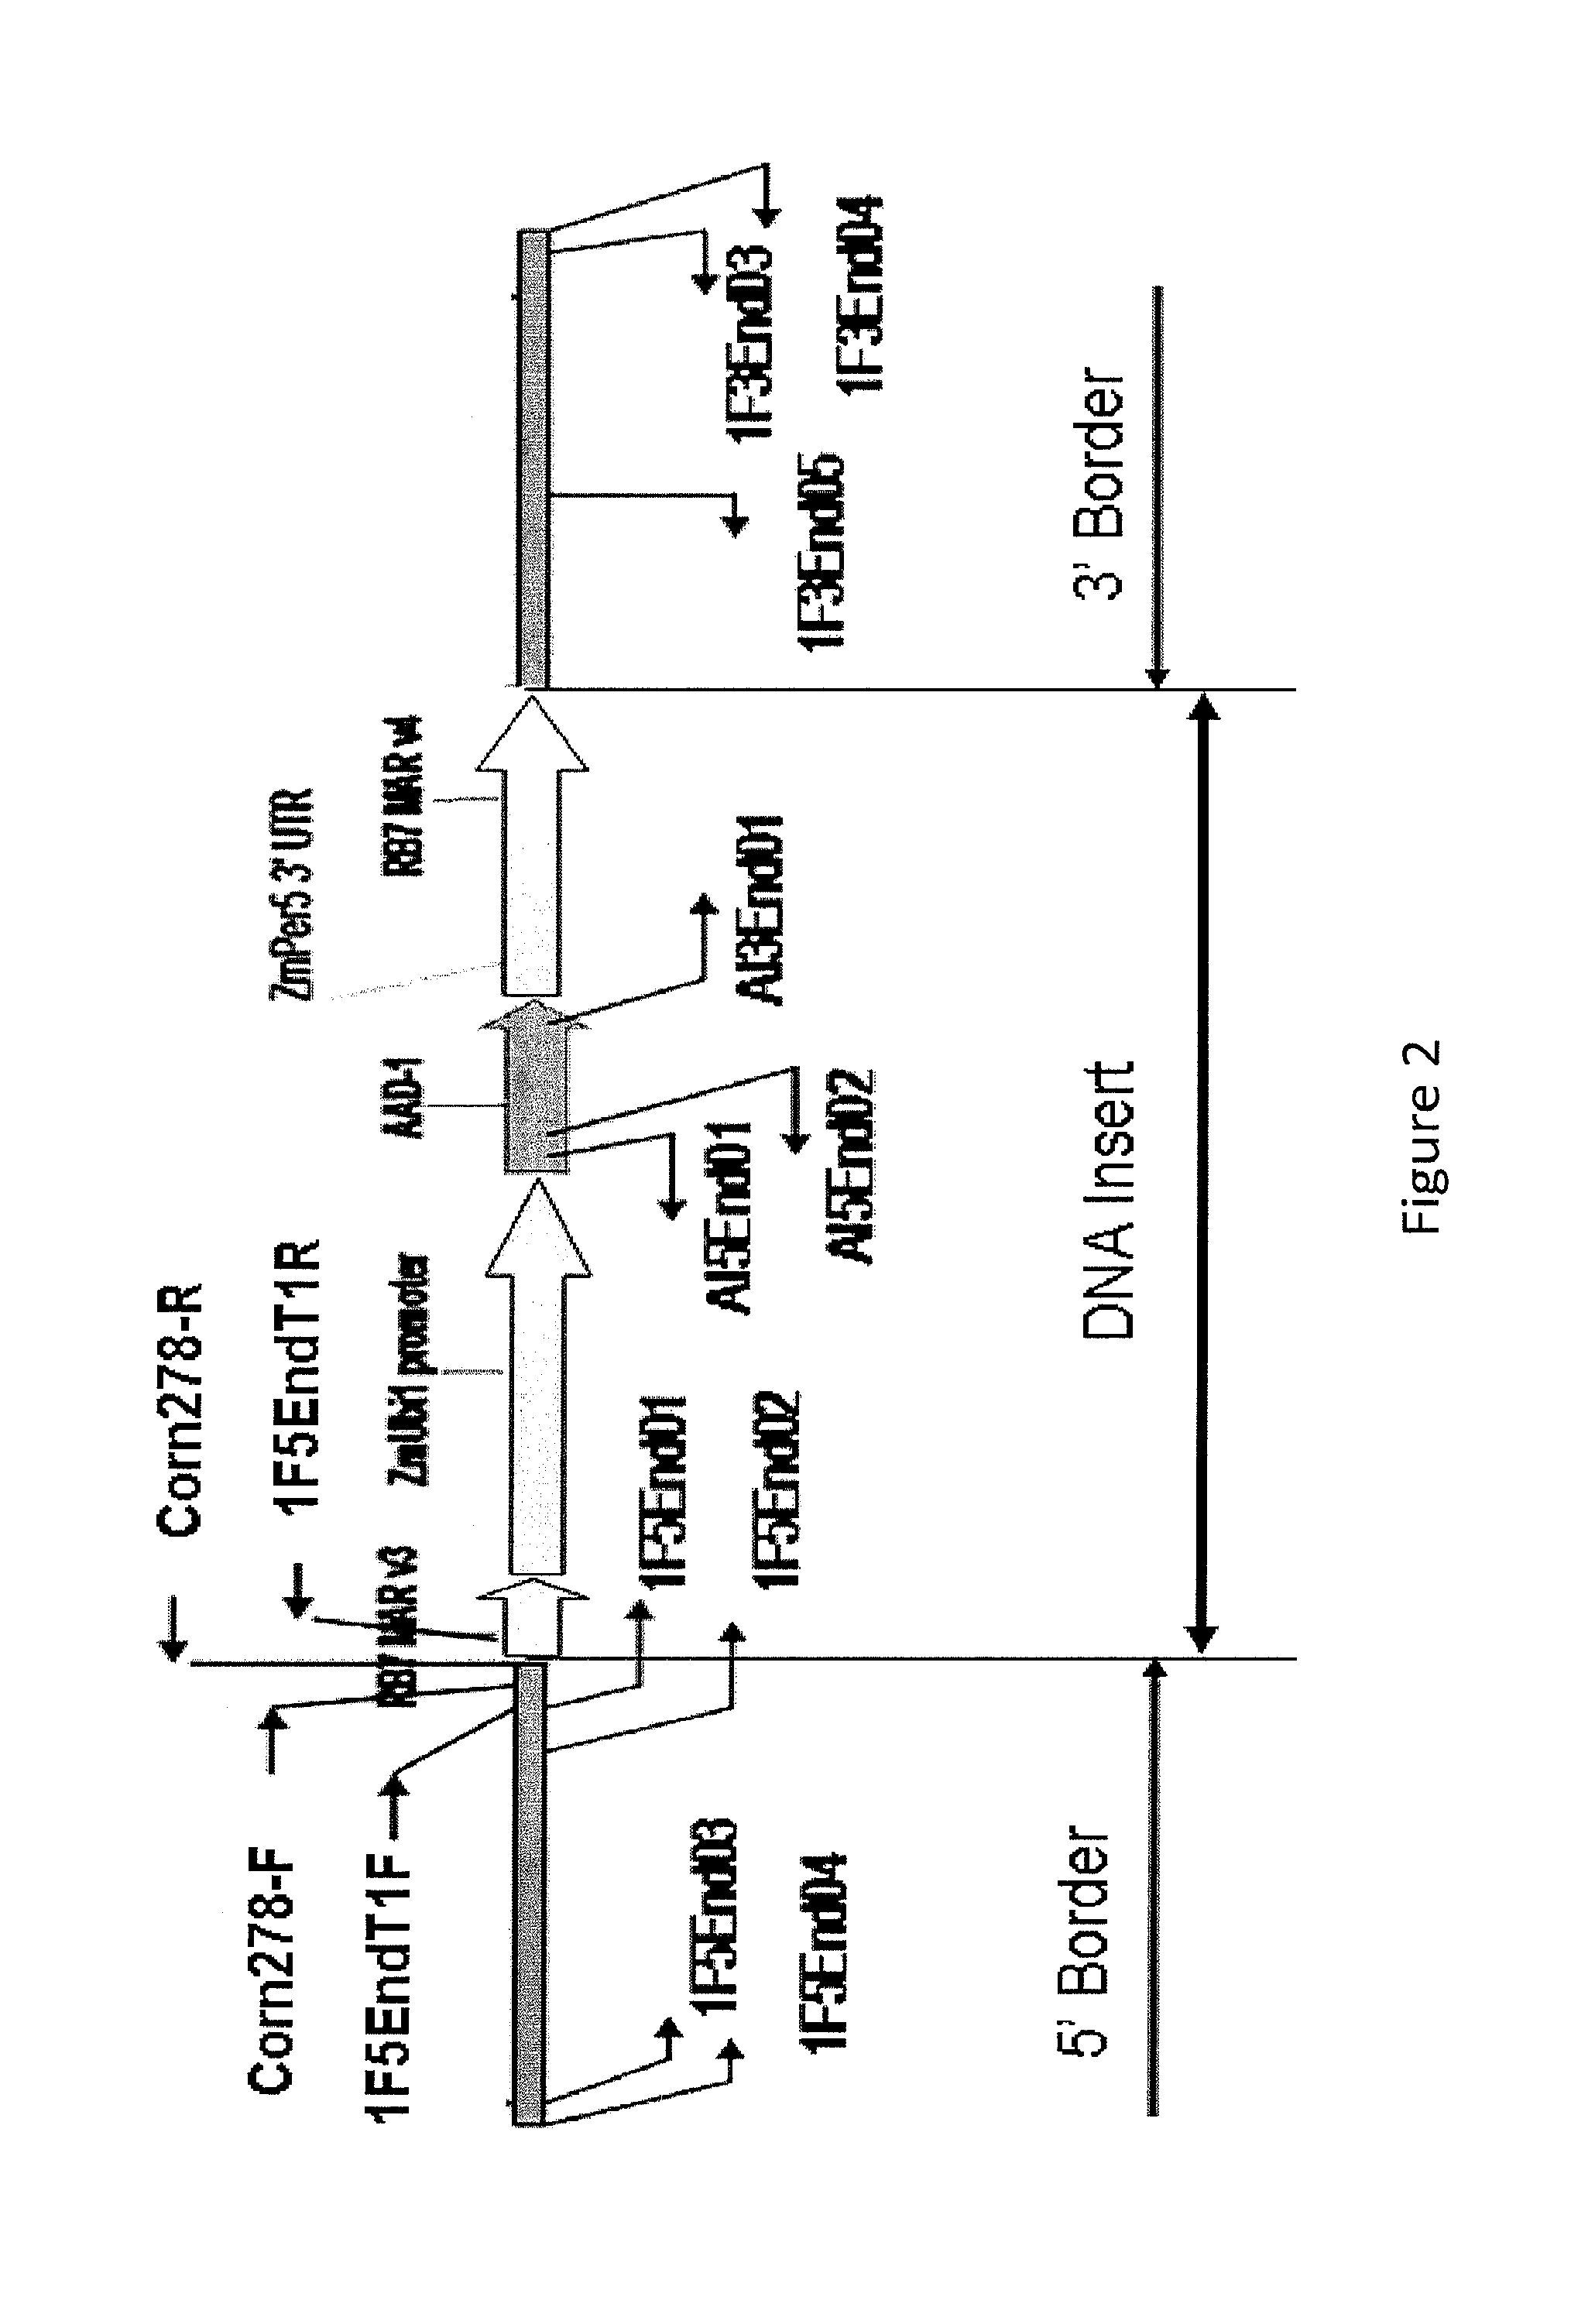 Detection of AAD1 event DAS-40278-9